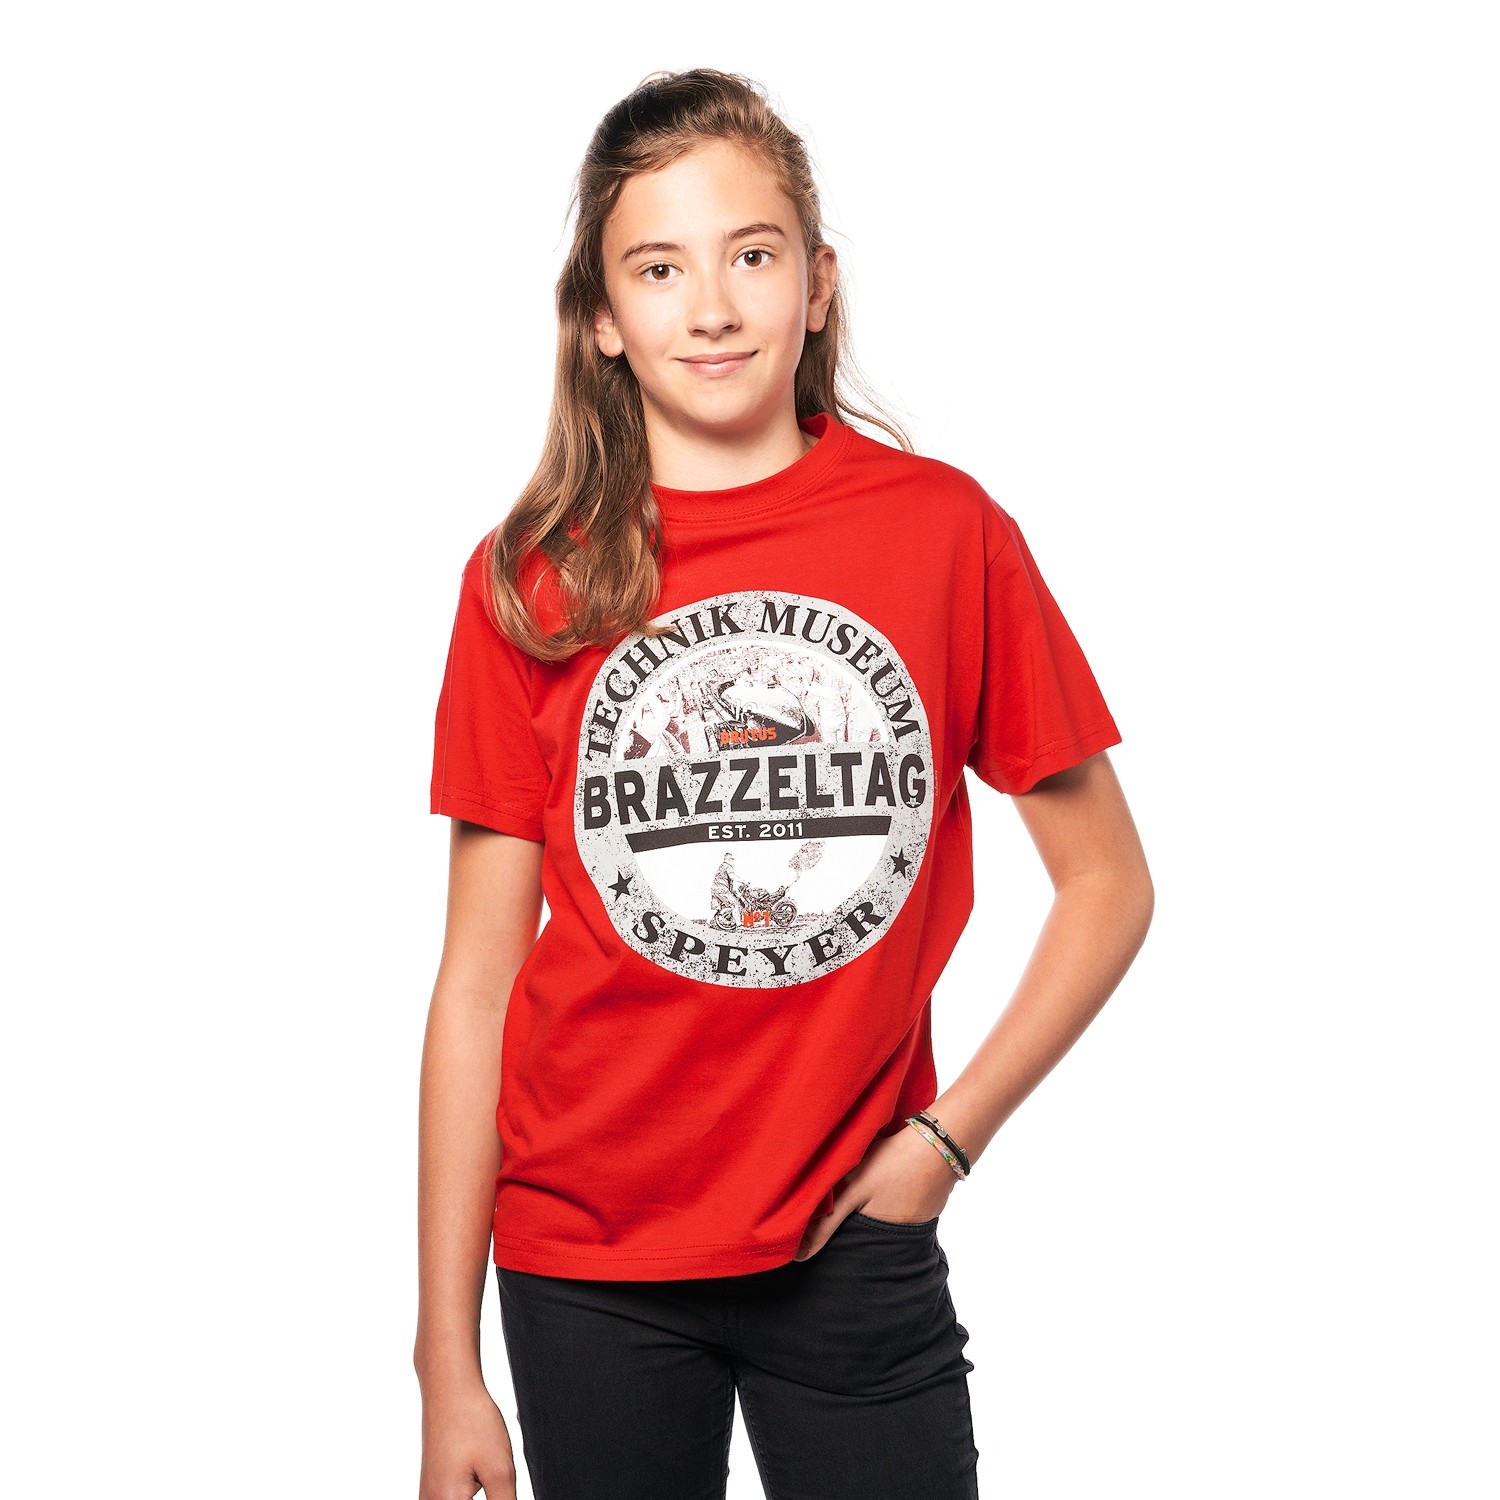 Brazzeltag - Kids shirt red